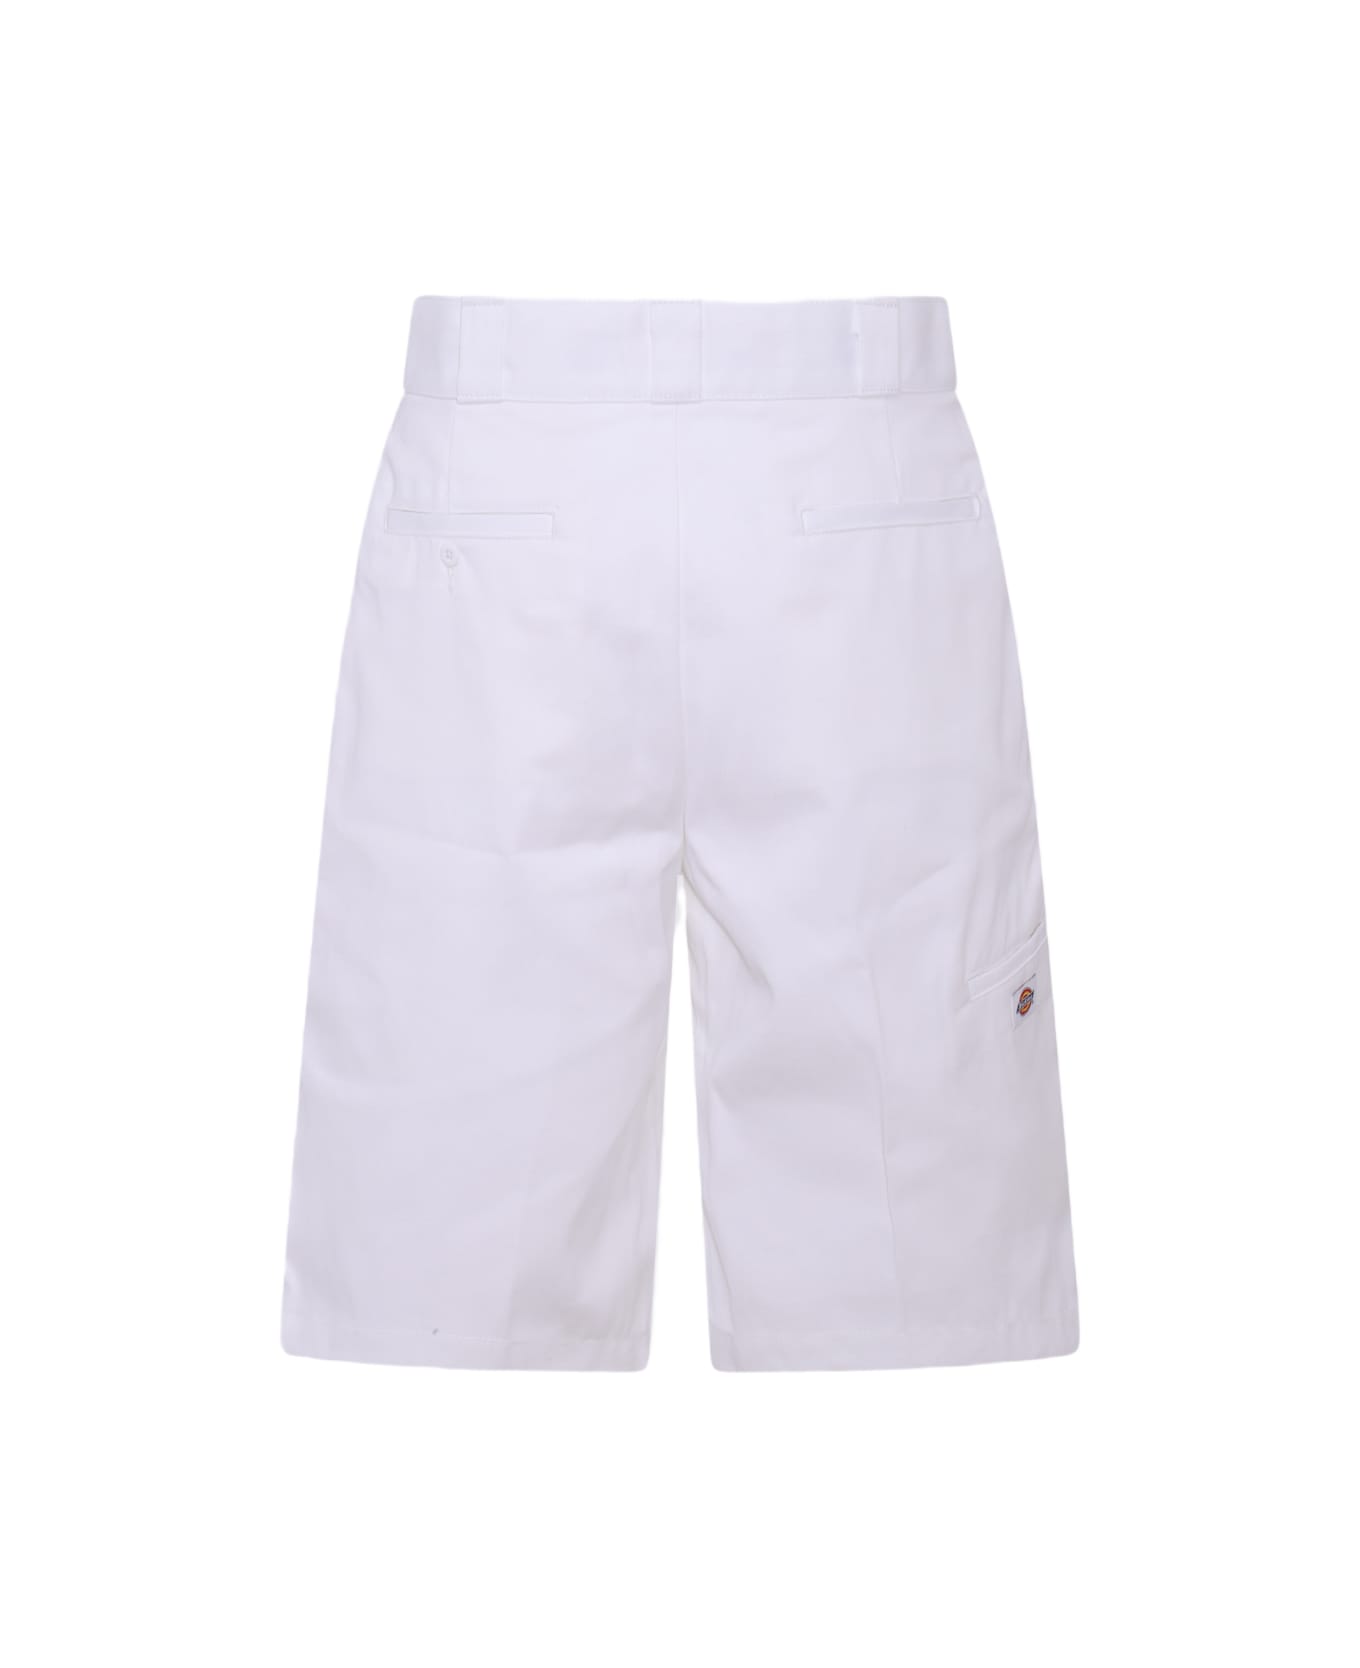 Dickies White Cotton Blend Shorts